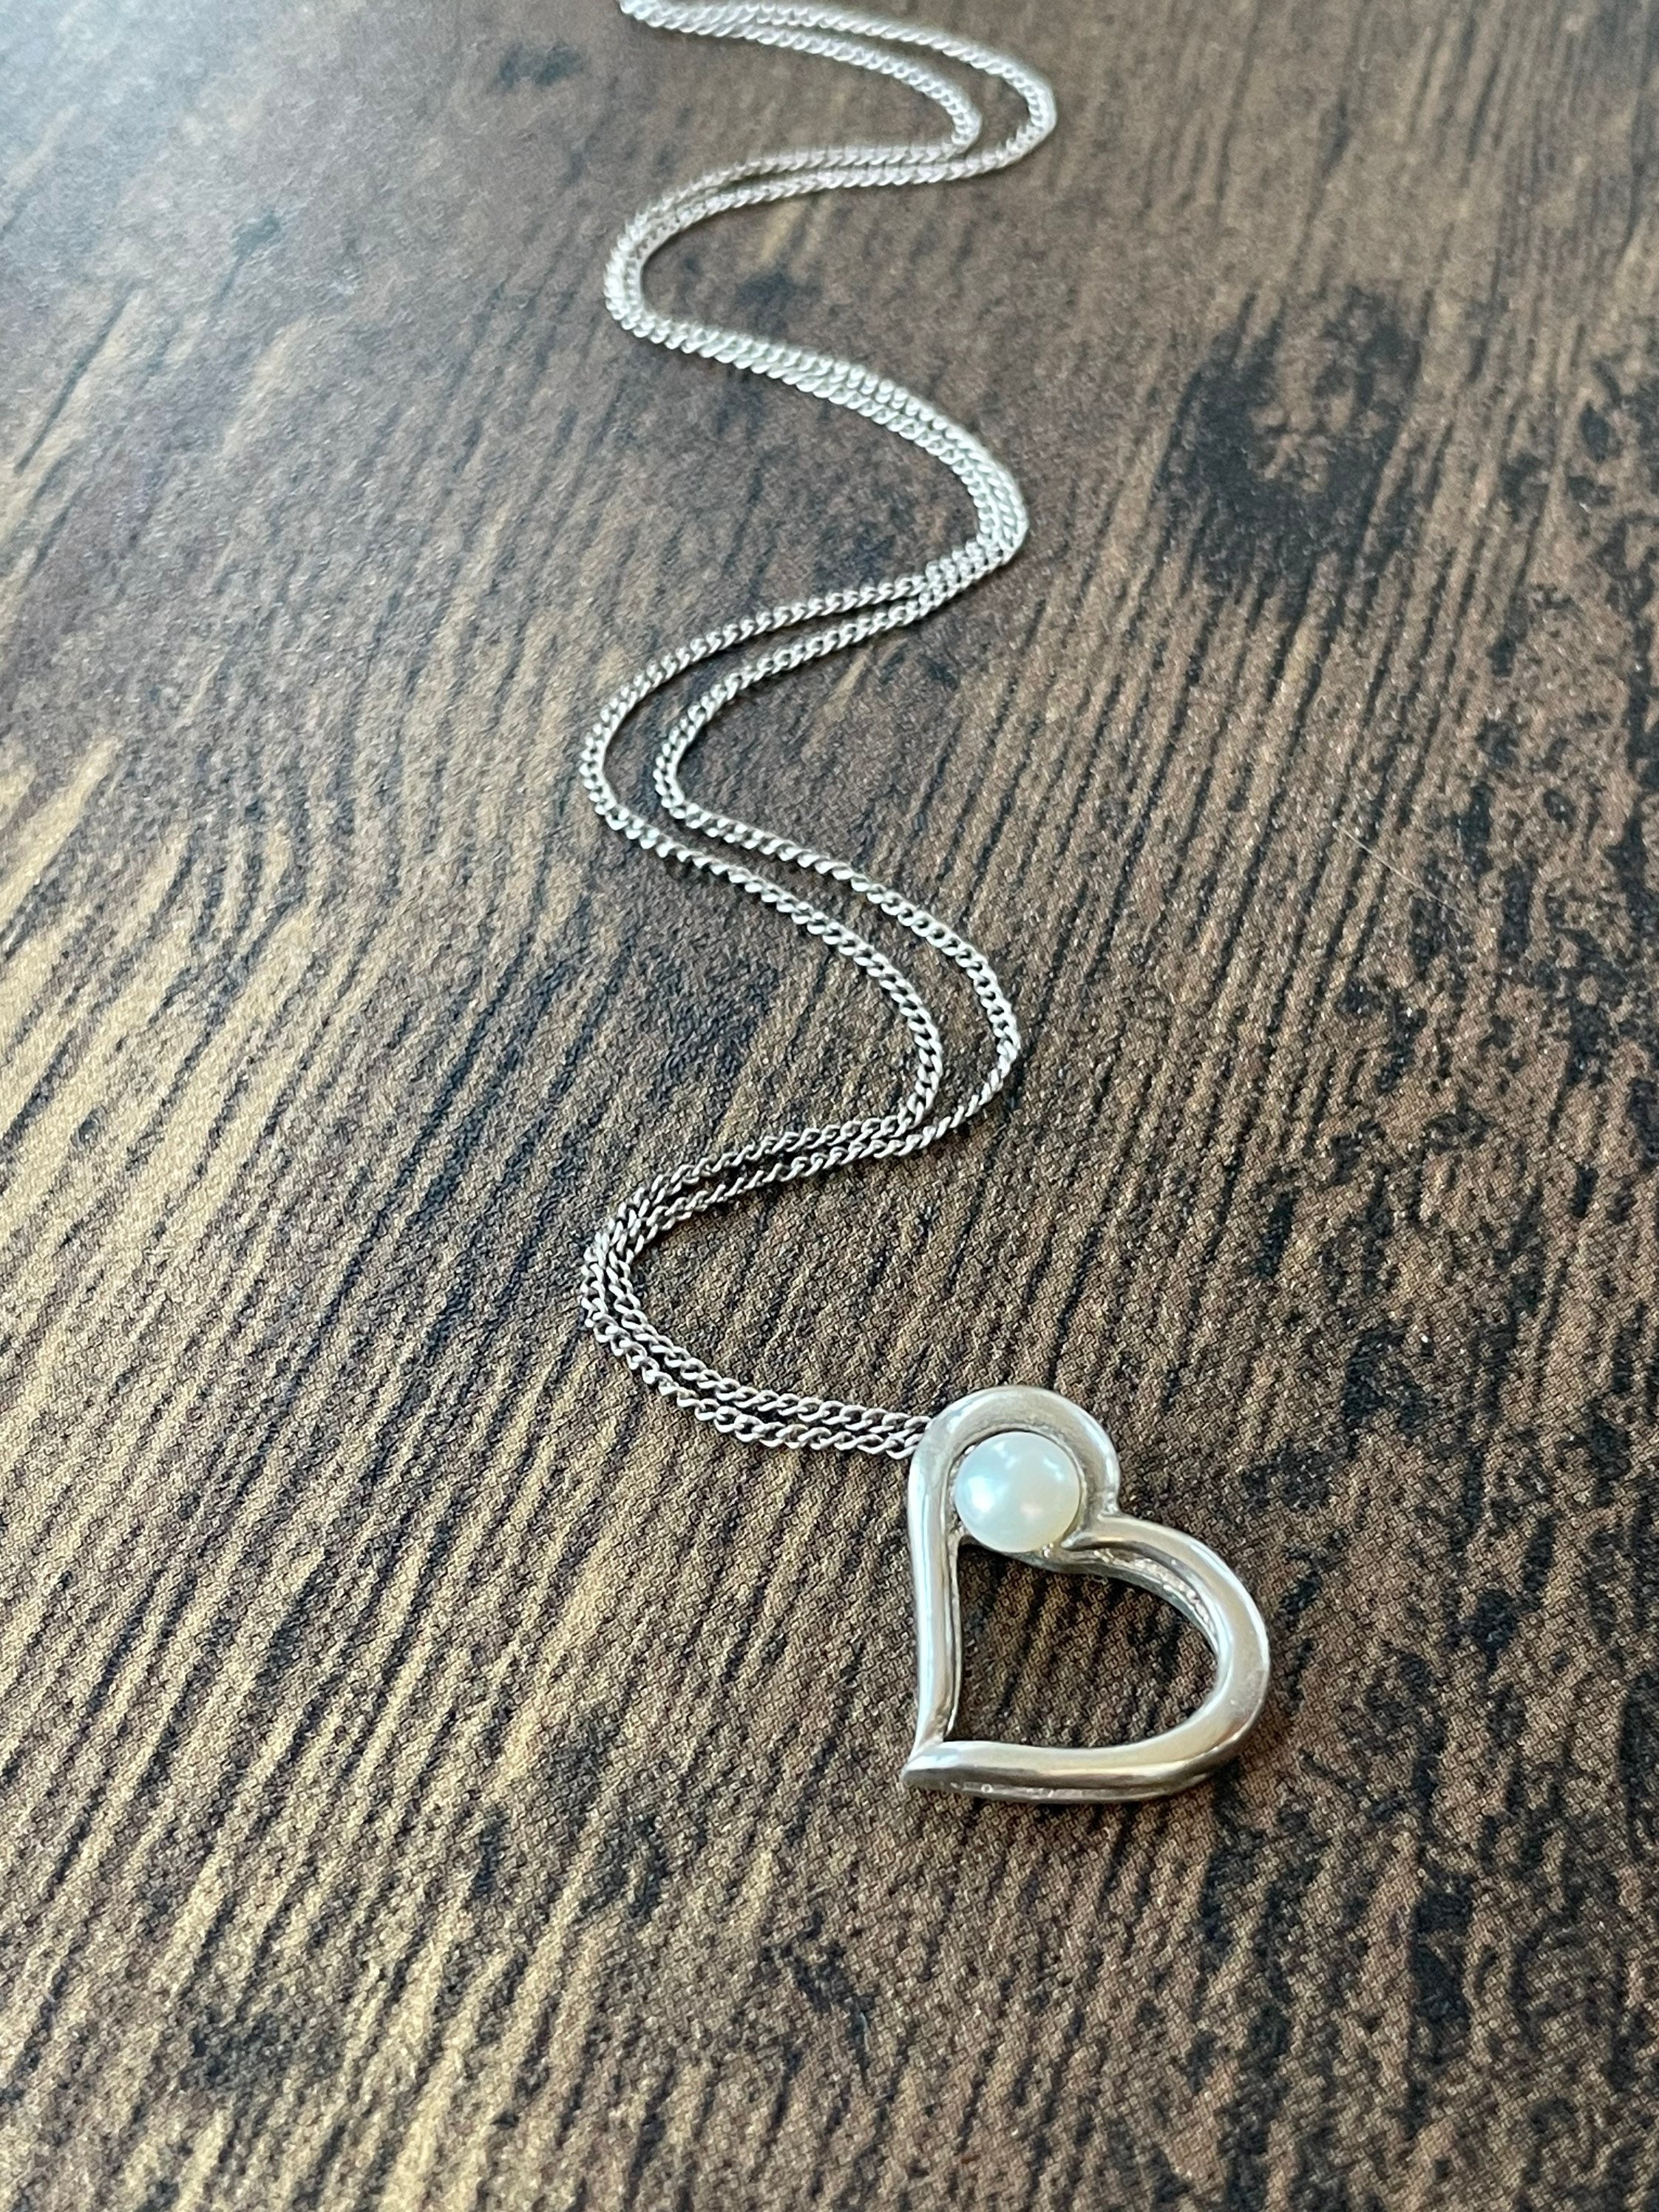 Silver Heart Choker Curvy Polished Silver 3/4inch Puffy Heart Made by Avon Silver Curb Chain 14-16.5 inch Length Vintage 1990s